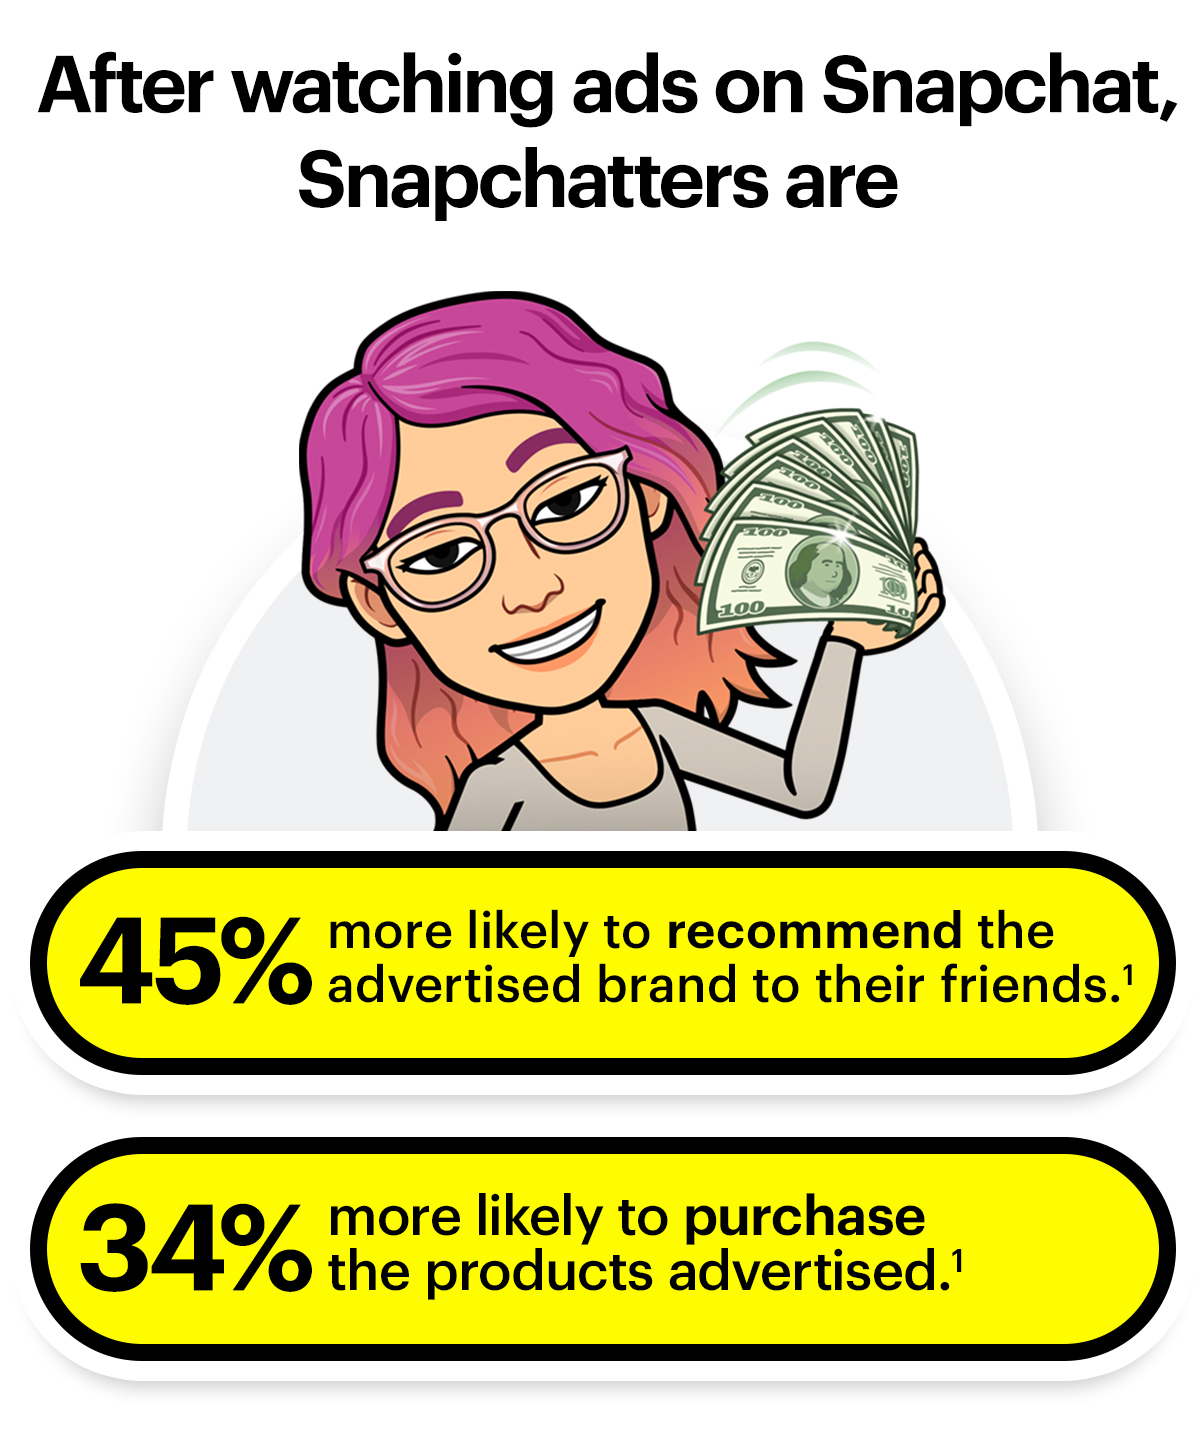 Snapchat Ads, Explained: Benefits, Examples, Stats, Strategies